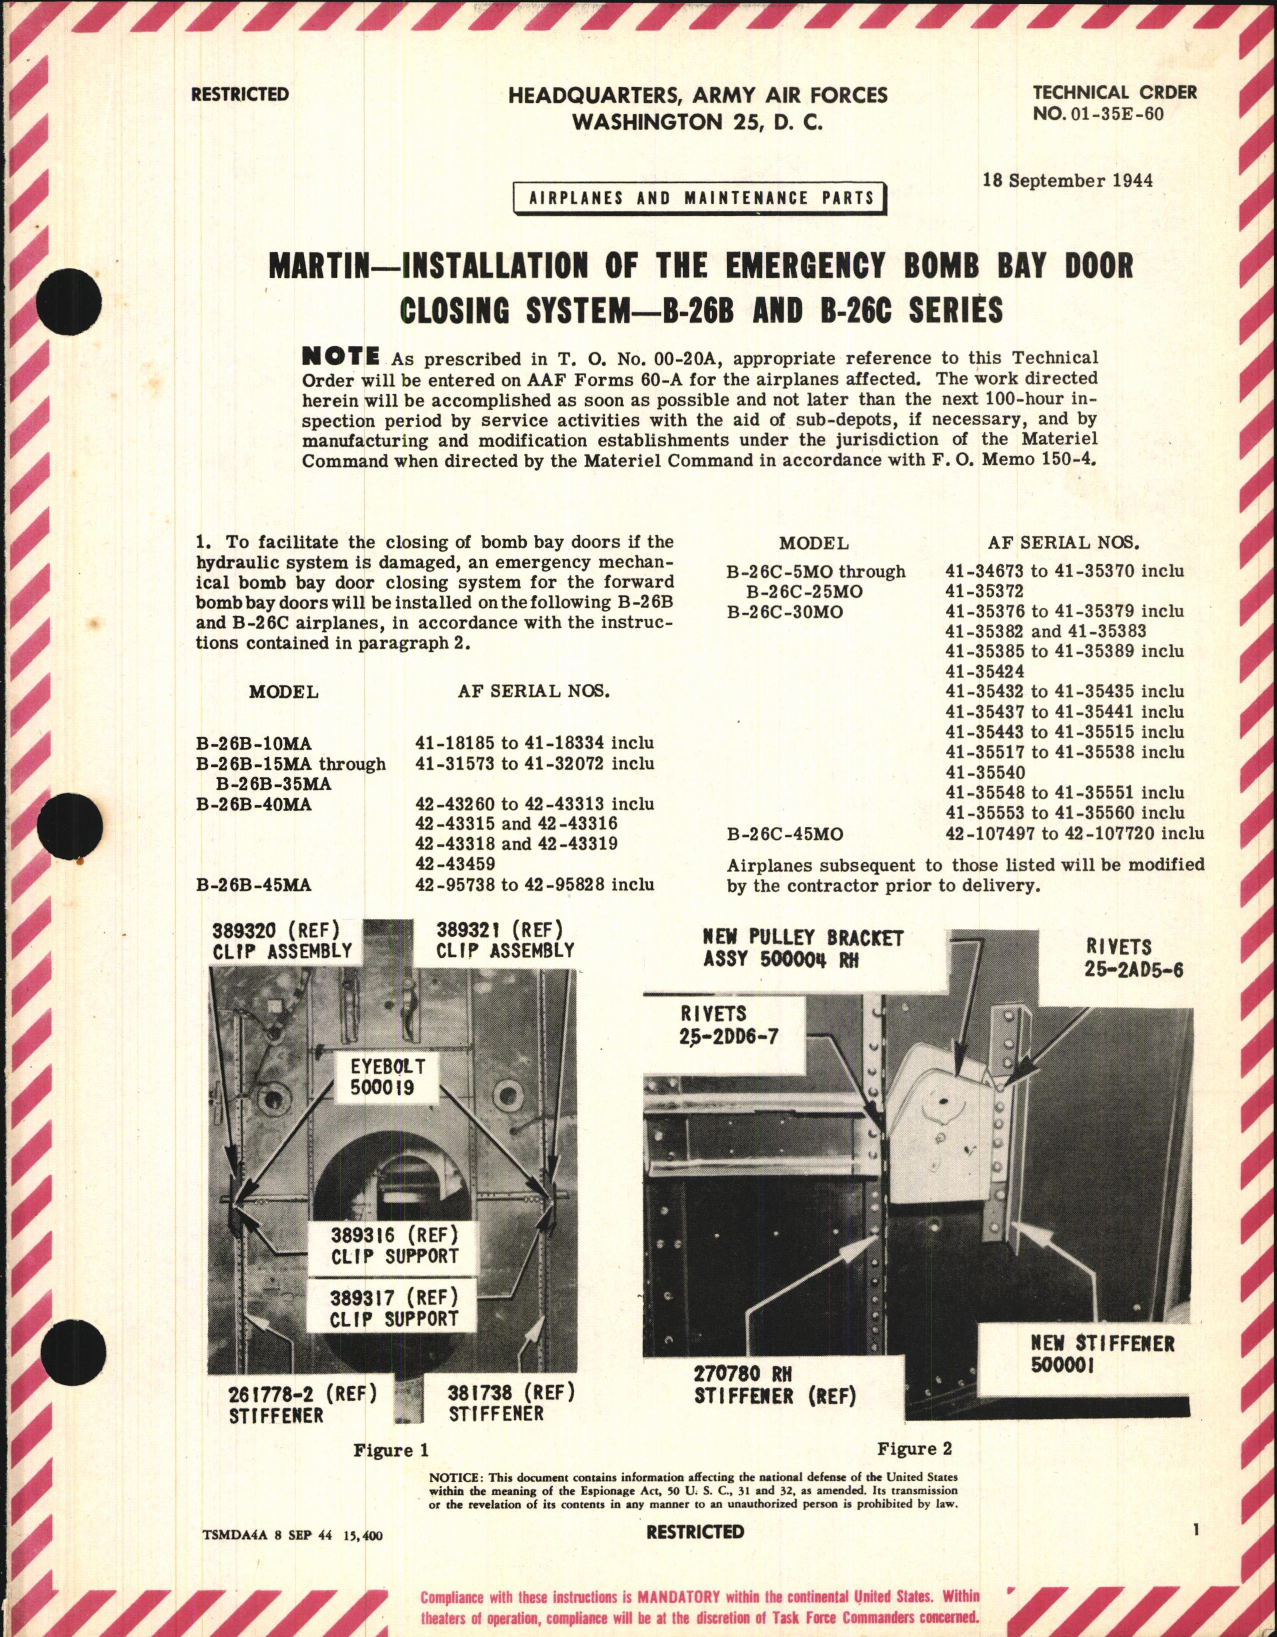 Sample page 1 from AirCorps Library document: Installation of the Emergency Bomb Bay Door Closing System for B-26B and B-26C Series